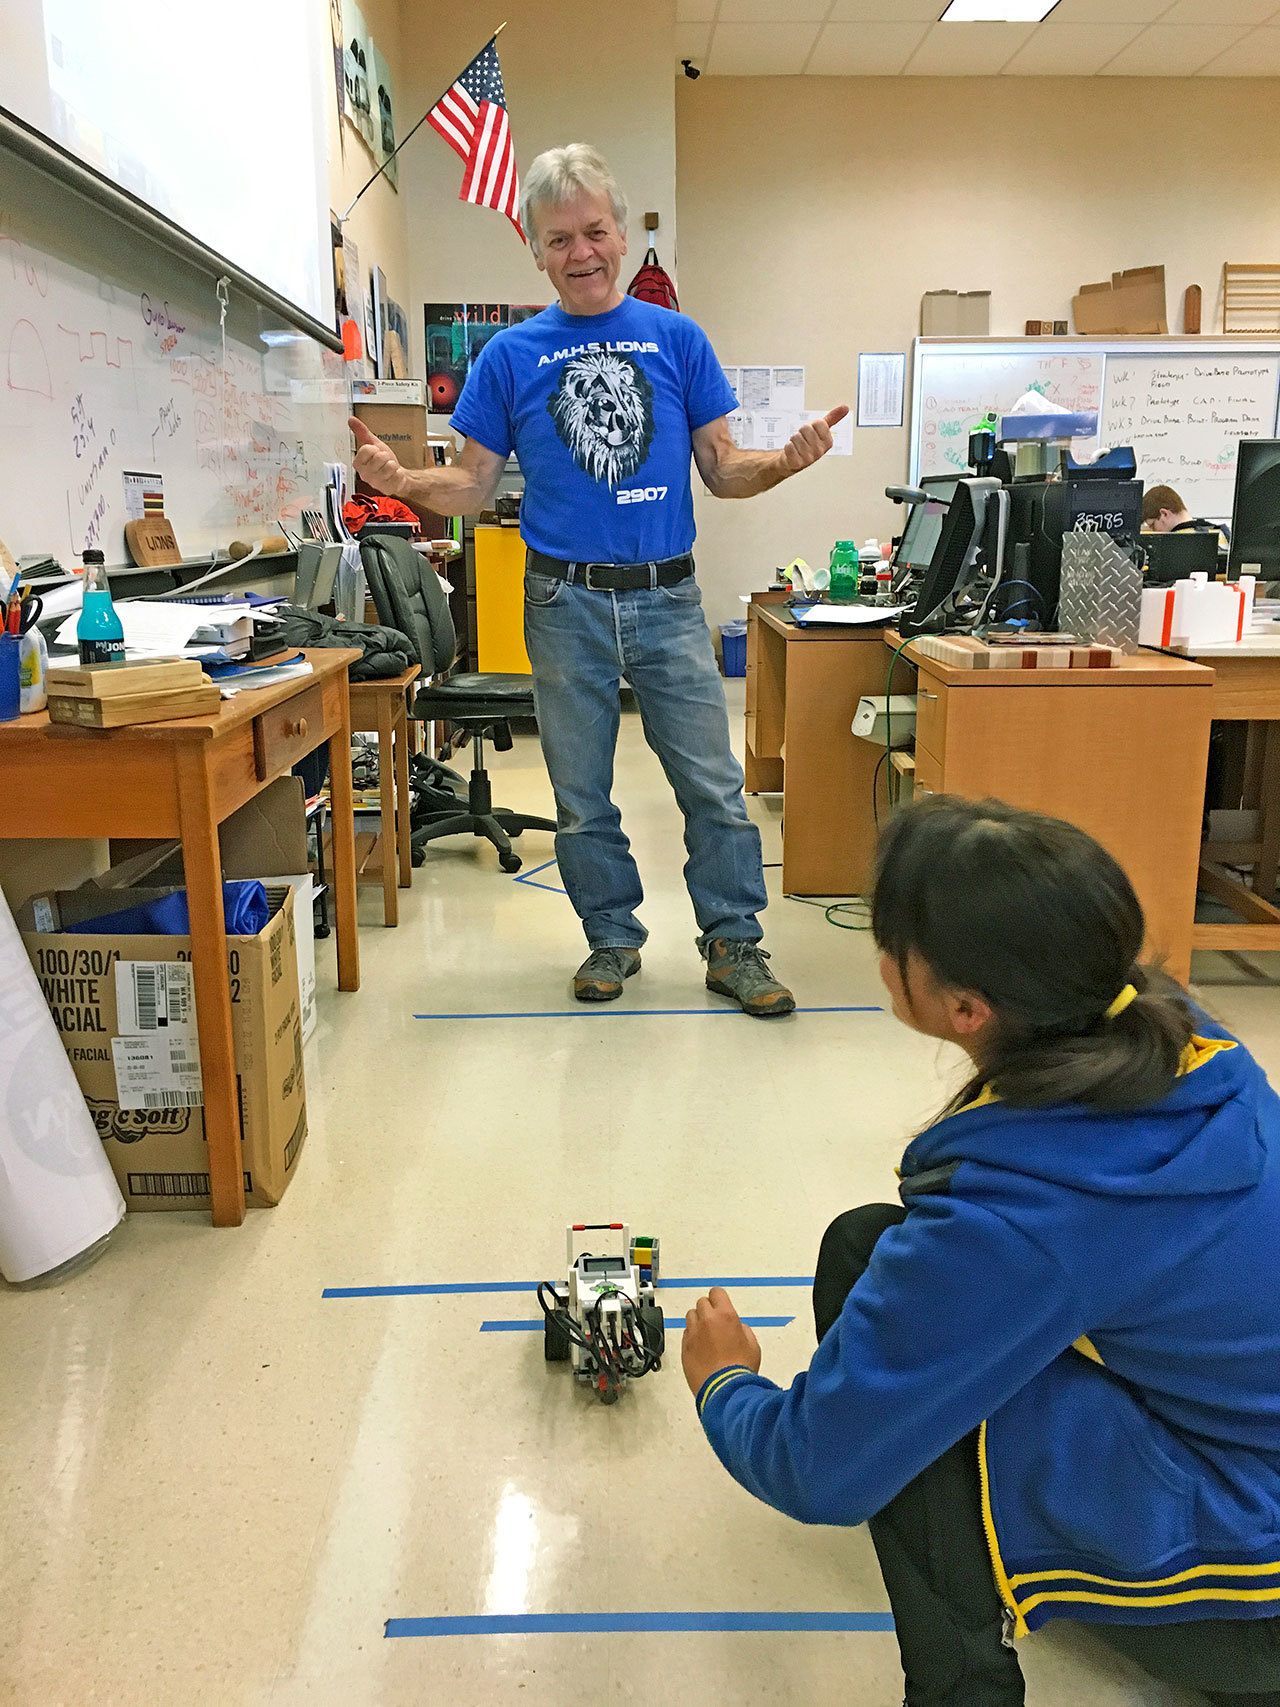 Auburn Mountainview’s Tim Scott’s work with robotics students helped earn recognition as one of Symetra’s “Heroes in the Classroom,” which recognizes 16 Seattle-area teachers “for their outstanding contribution to kids in our community.” CHRIS CHANCELLOR, Auburn Reporter